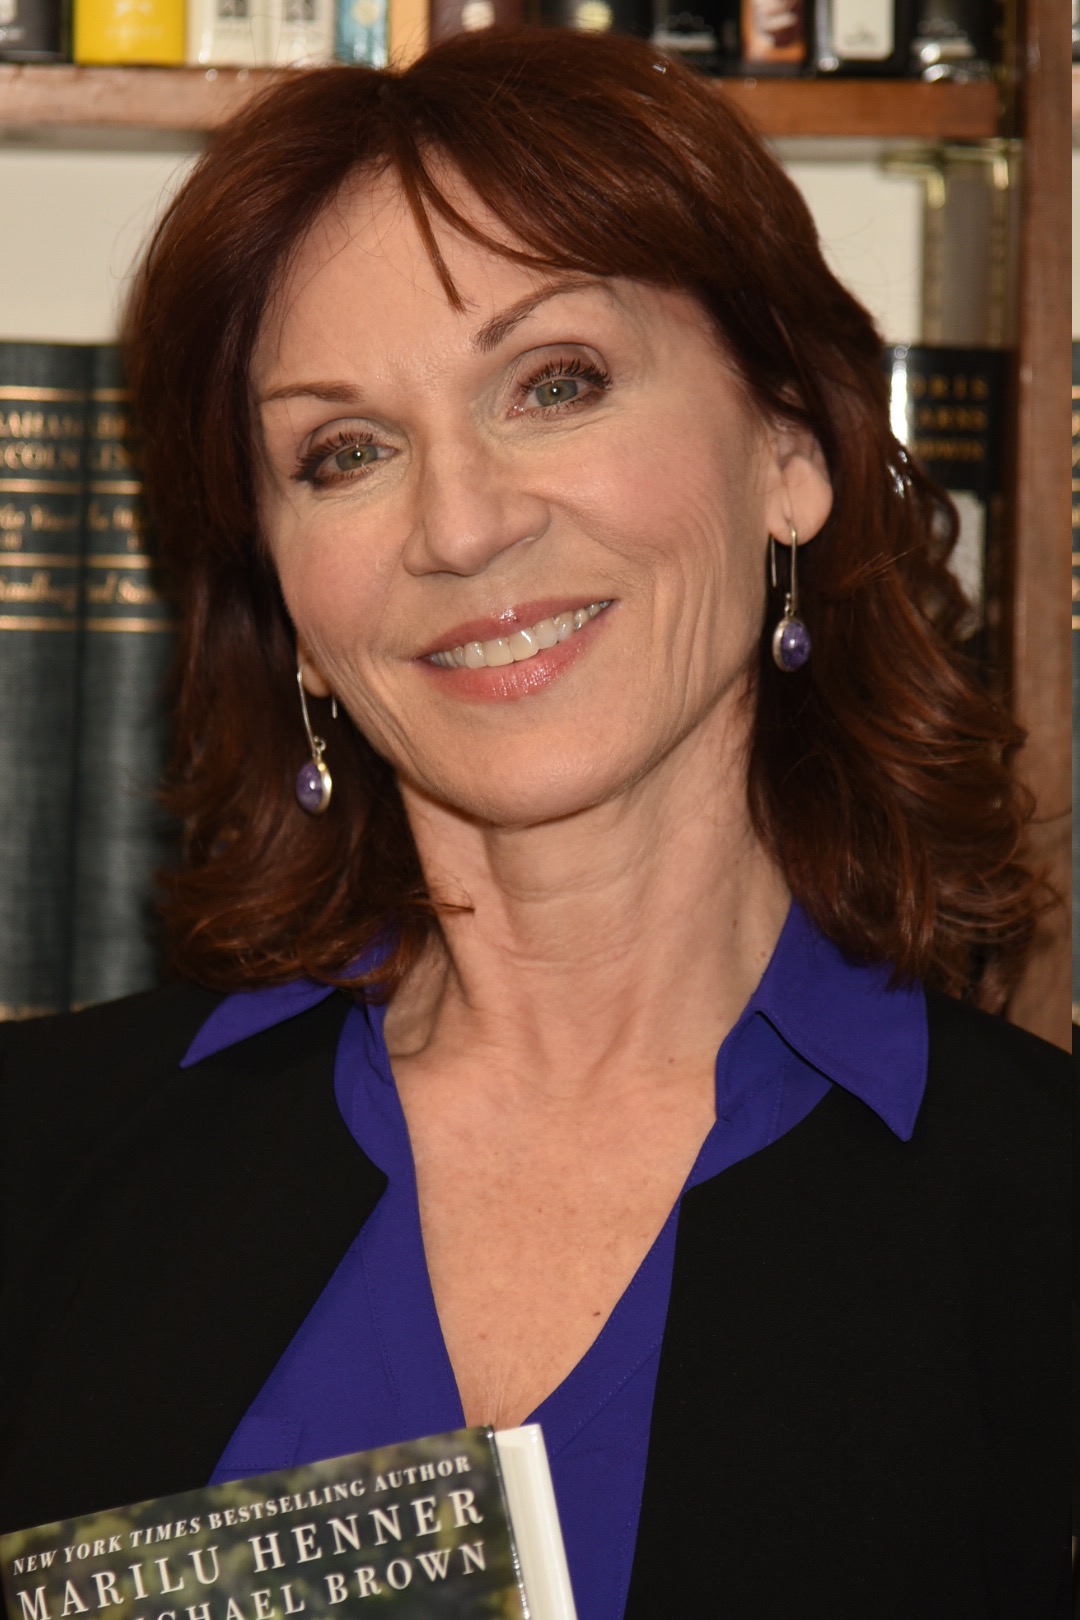 Marilu Henner Signs copies of her new book Changing Normal in New York